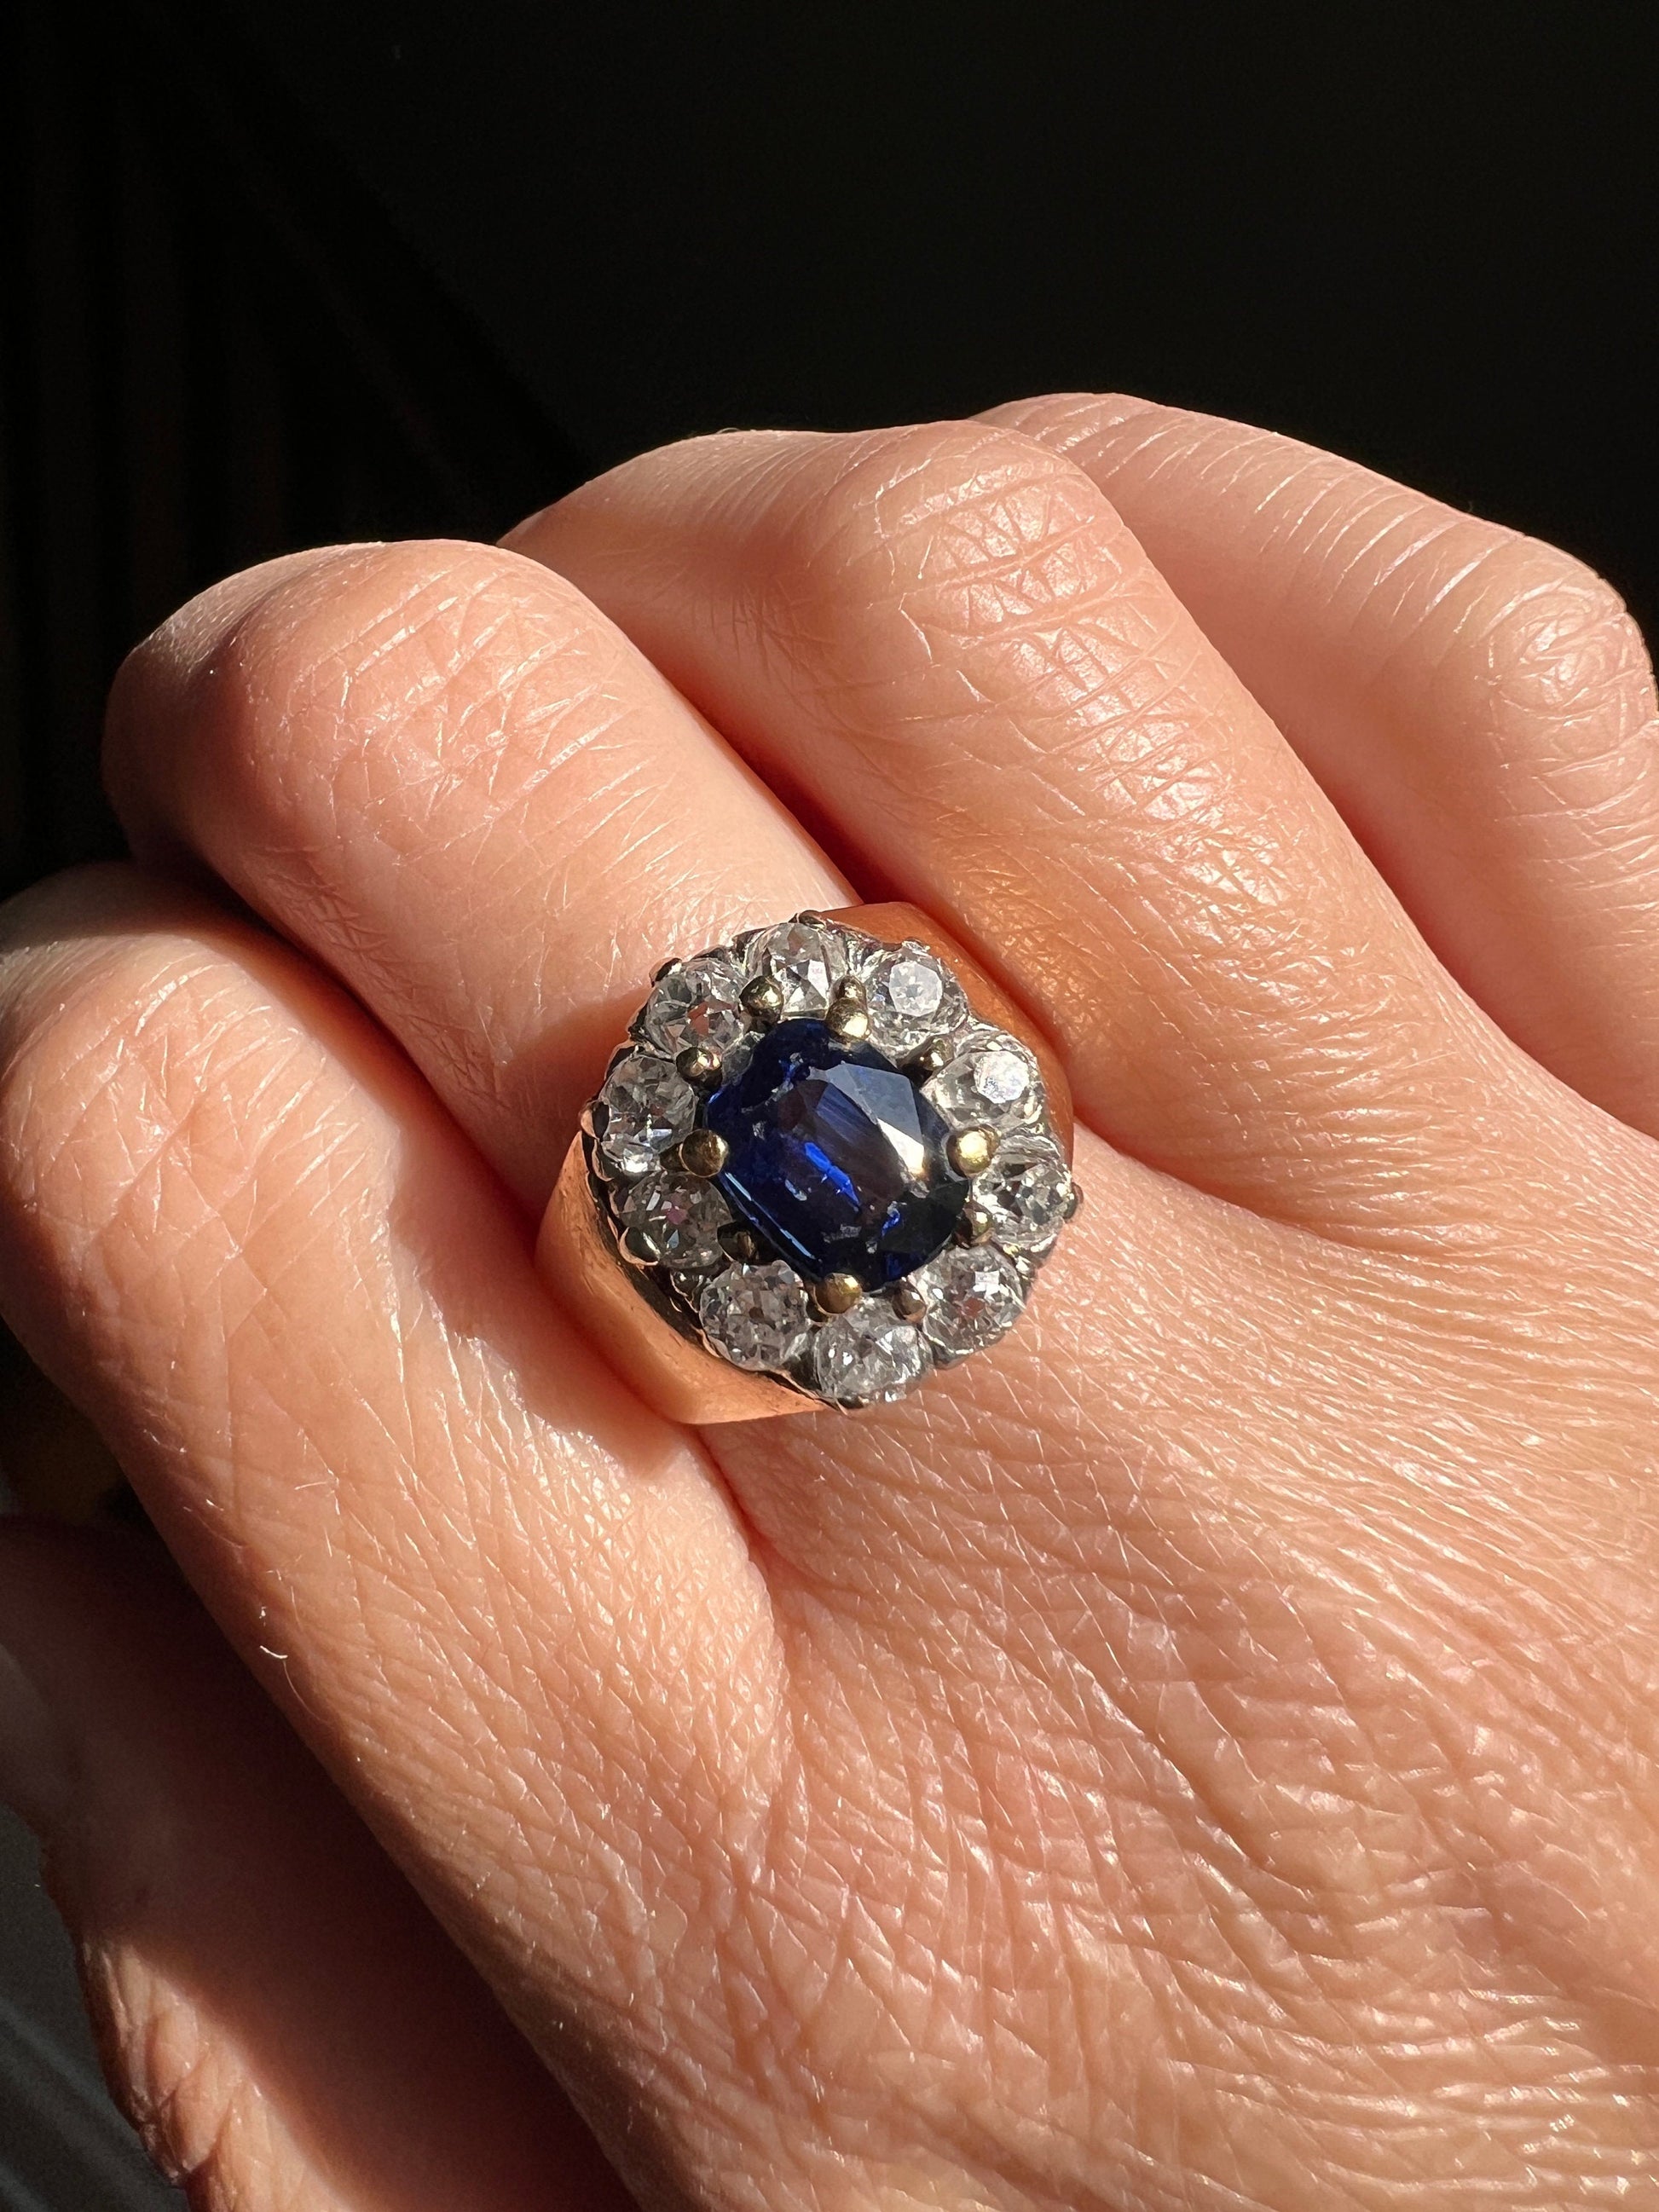 HEAVY French Antique SAPPHIRE 1.7 Carat Old Mine Cut DIAMOND Halo Cluster Ring 10.8g 18k Rose Gold Wide Band Signet Shoulders Sturdy OmC Wow